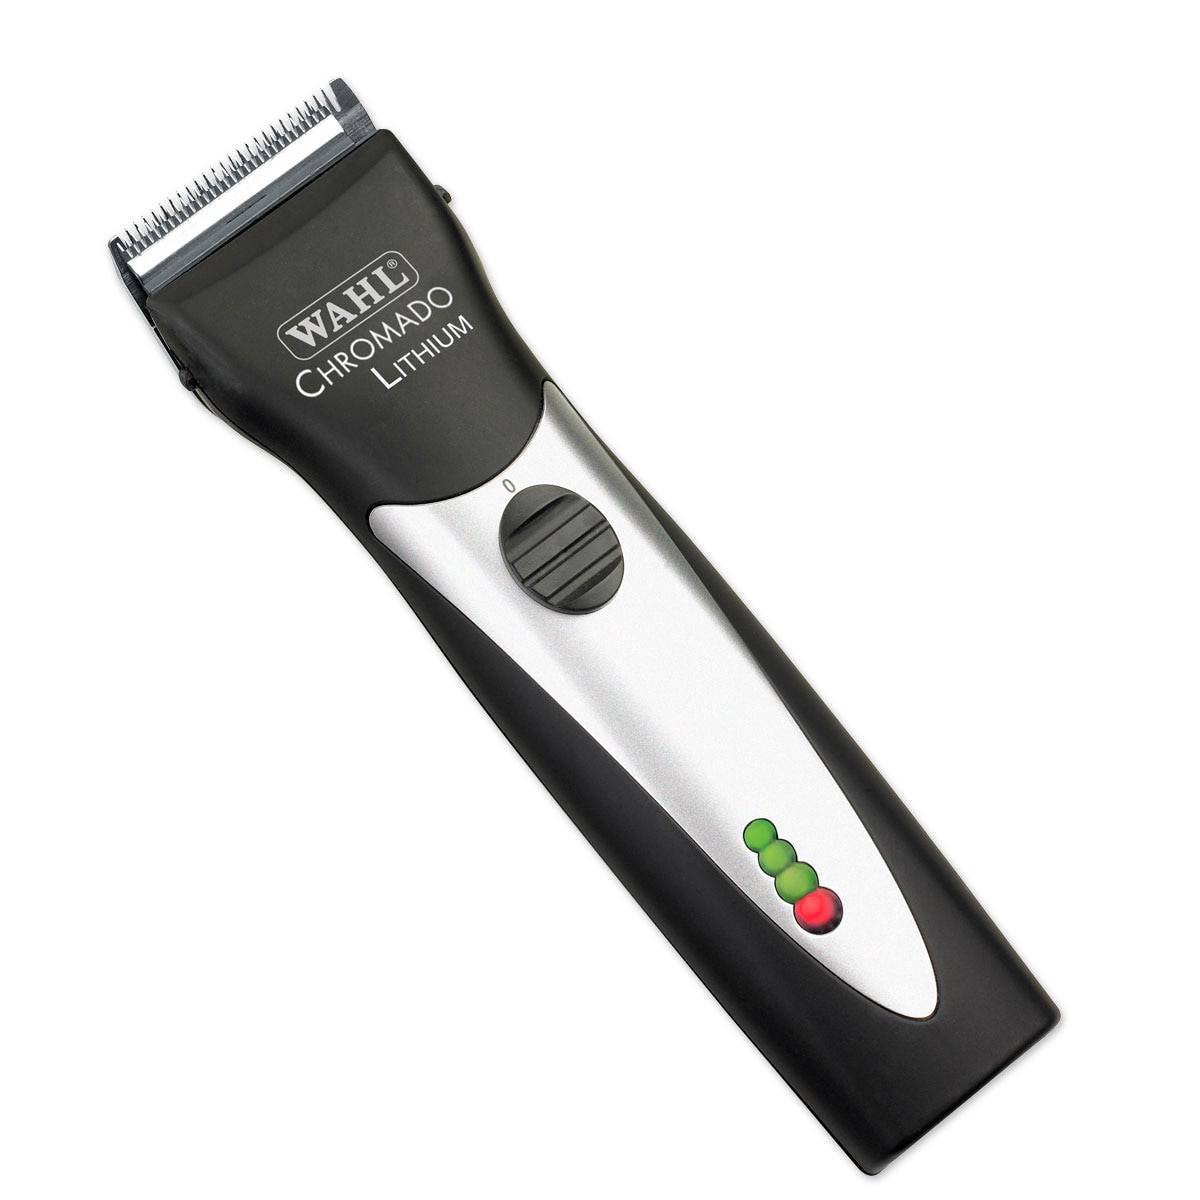 compare wahl clippers